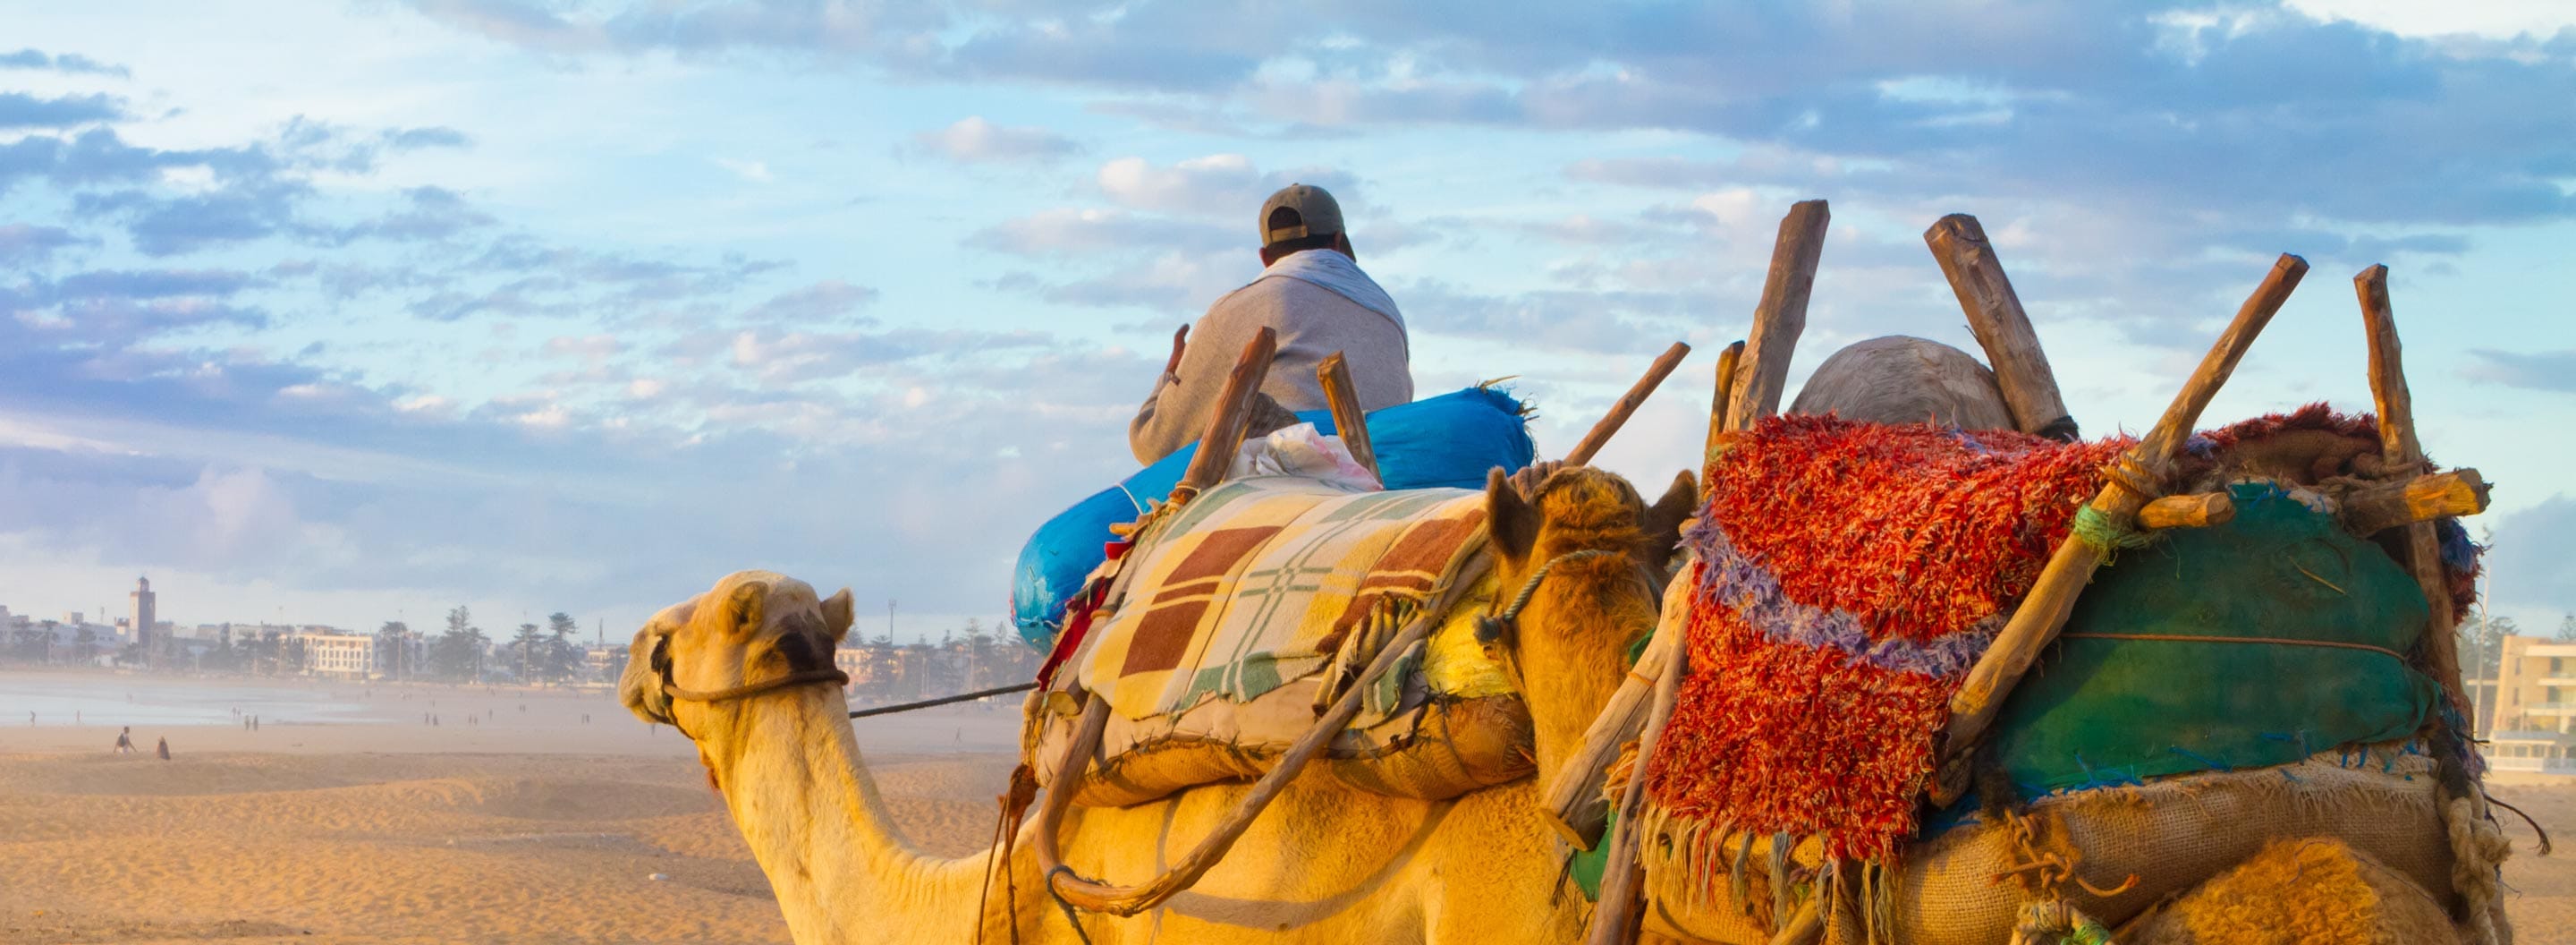 Riding a camel in Morocco